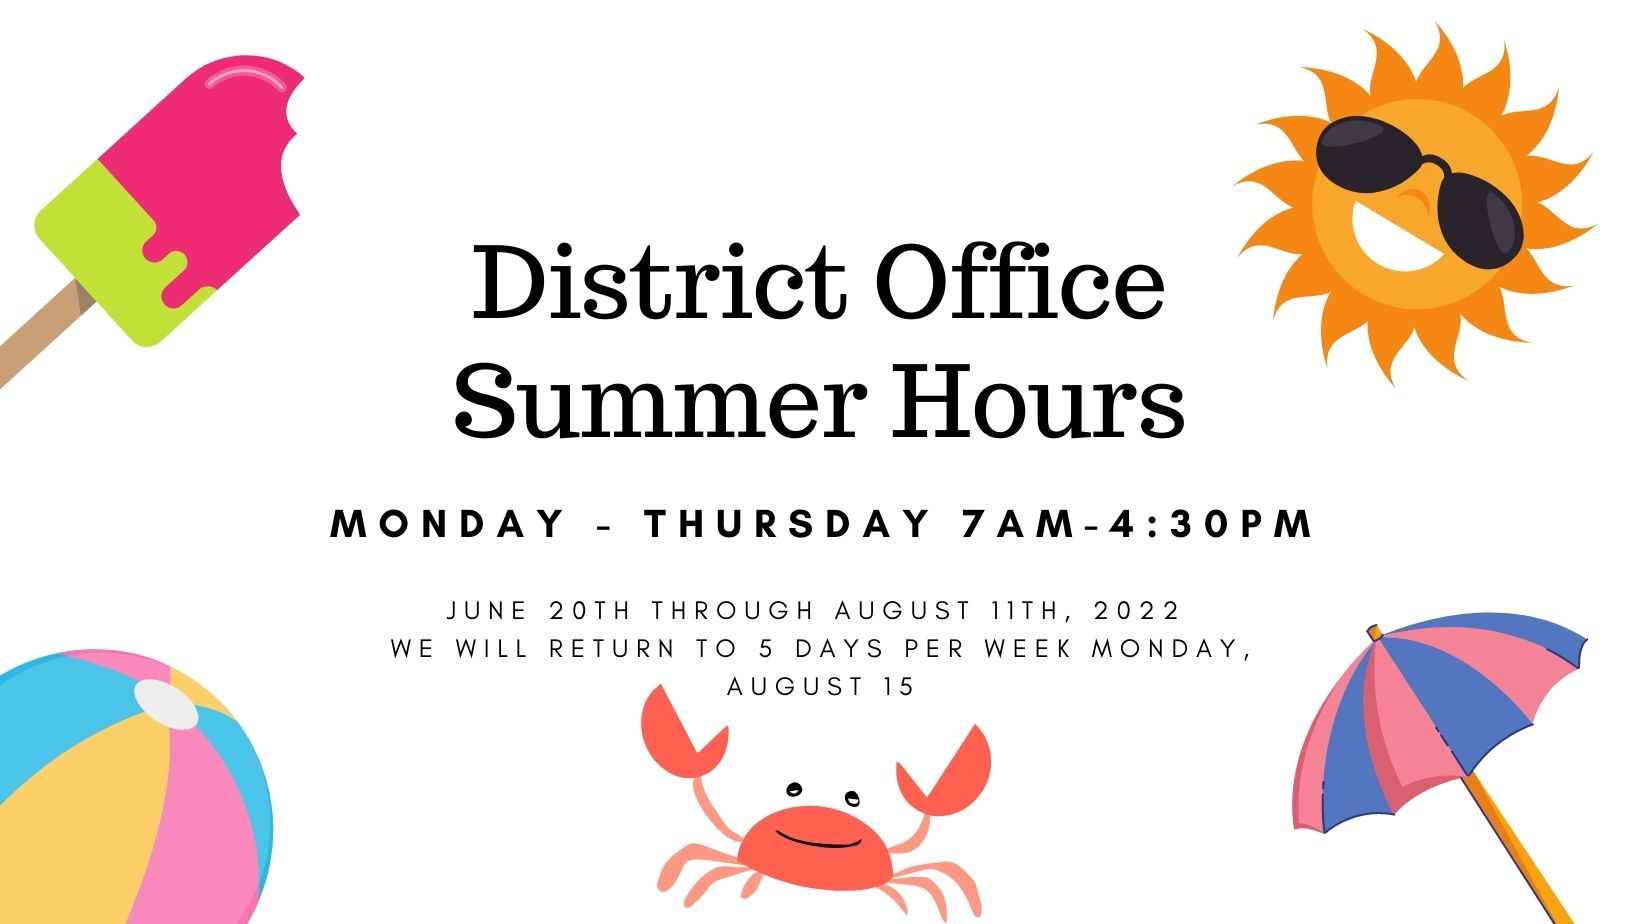 District Office Summer Hours Monday-Thursday 7-4:30 